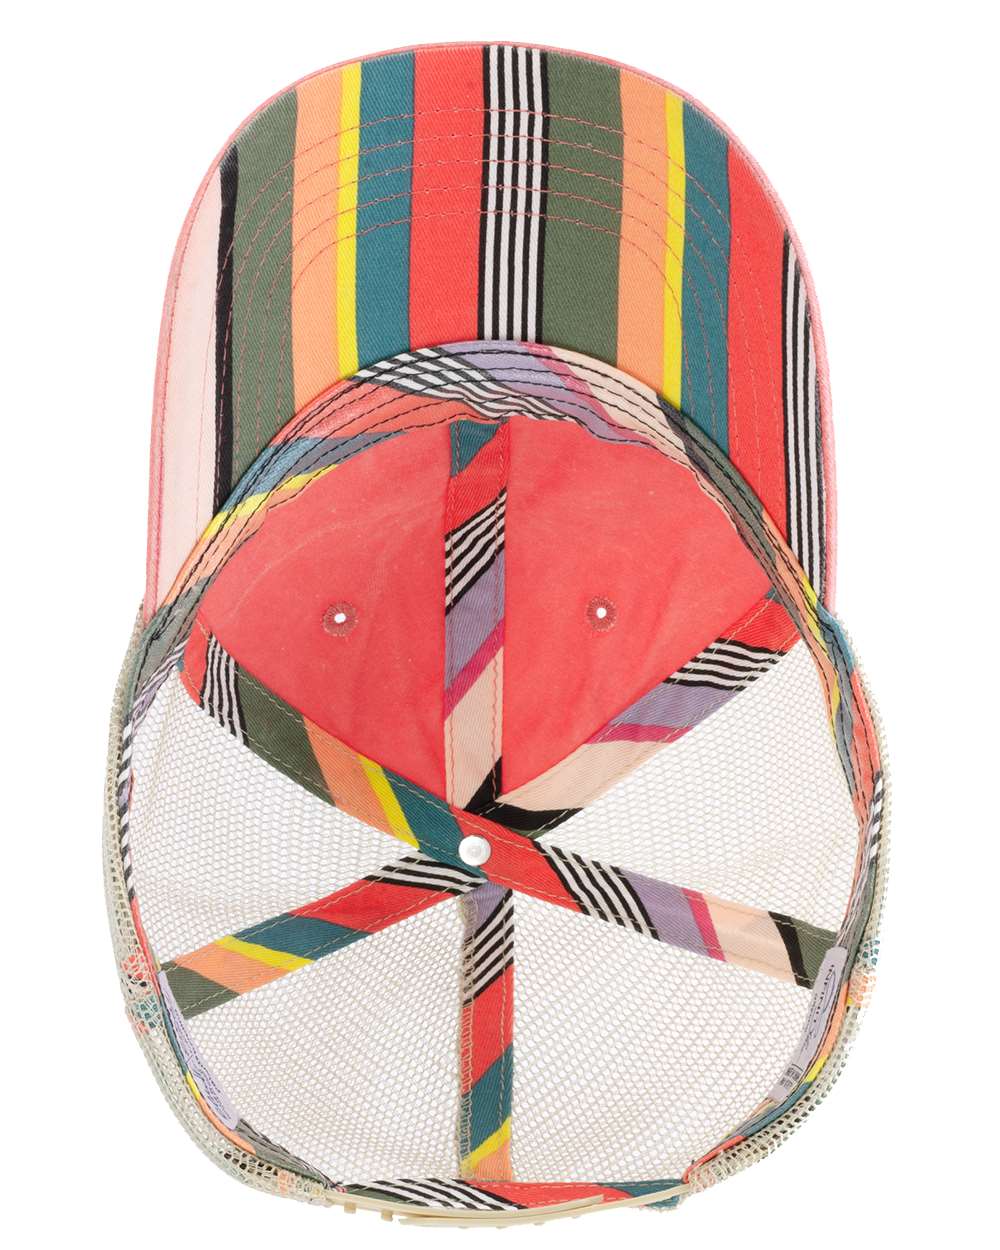 A women's washed mesh-back cap in sherbet with a striped pattern on the front panel.